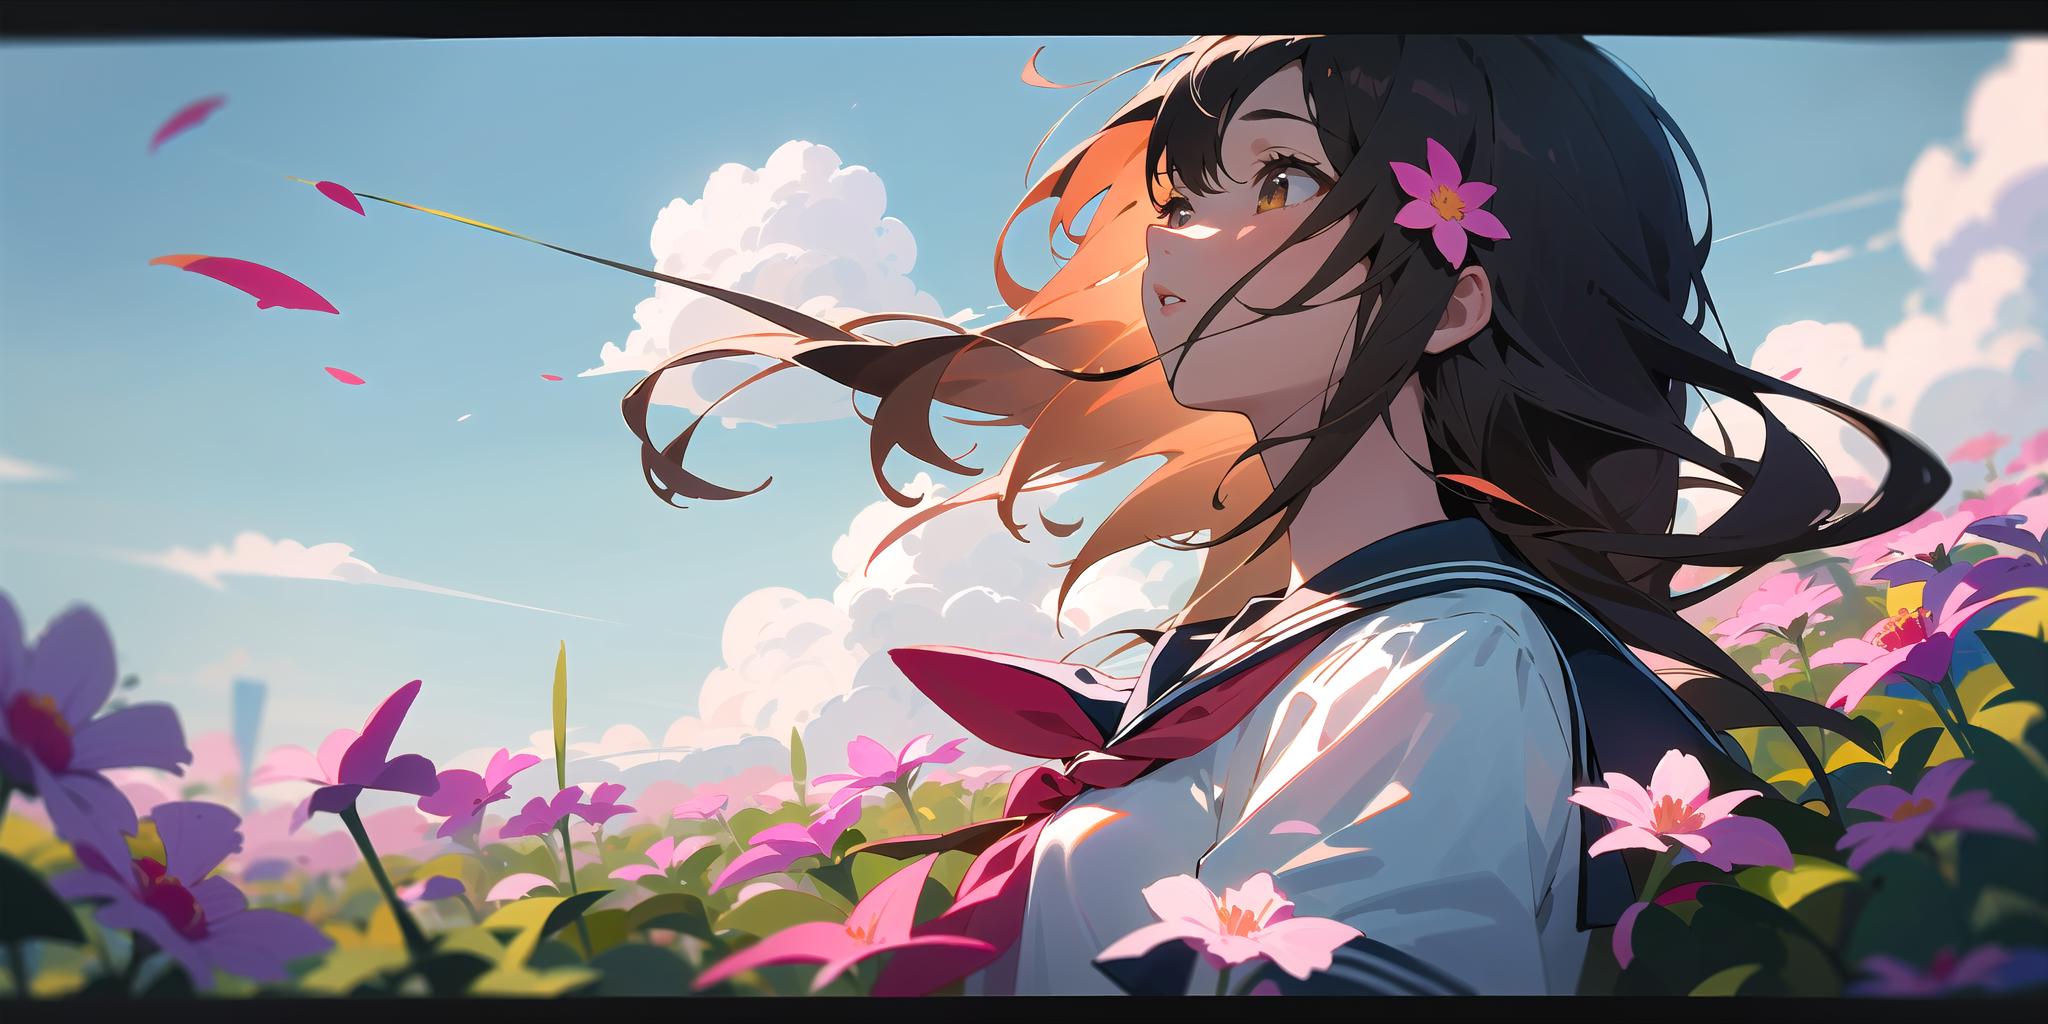 The image features a woman with long, brown hair wearing a school uniform, standing amidst a field of flowers. She is looking up at the sky, creating a serene and peaceful atmosphere. The woman's uniform includes a tie, which is visible as she gazes into the distance. The field of flowers surrounds her, adding a touch of color and natural beauty to the scene.